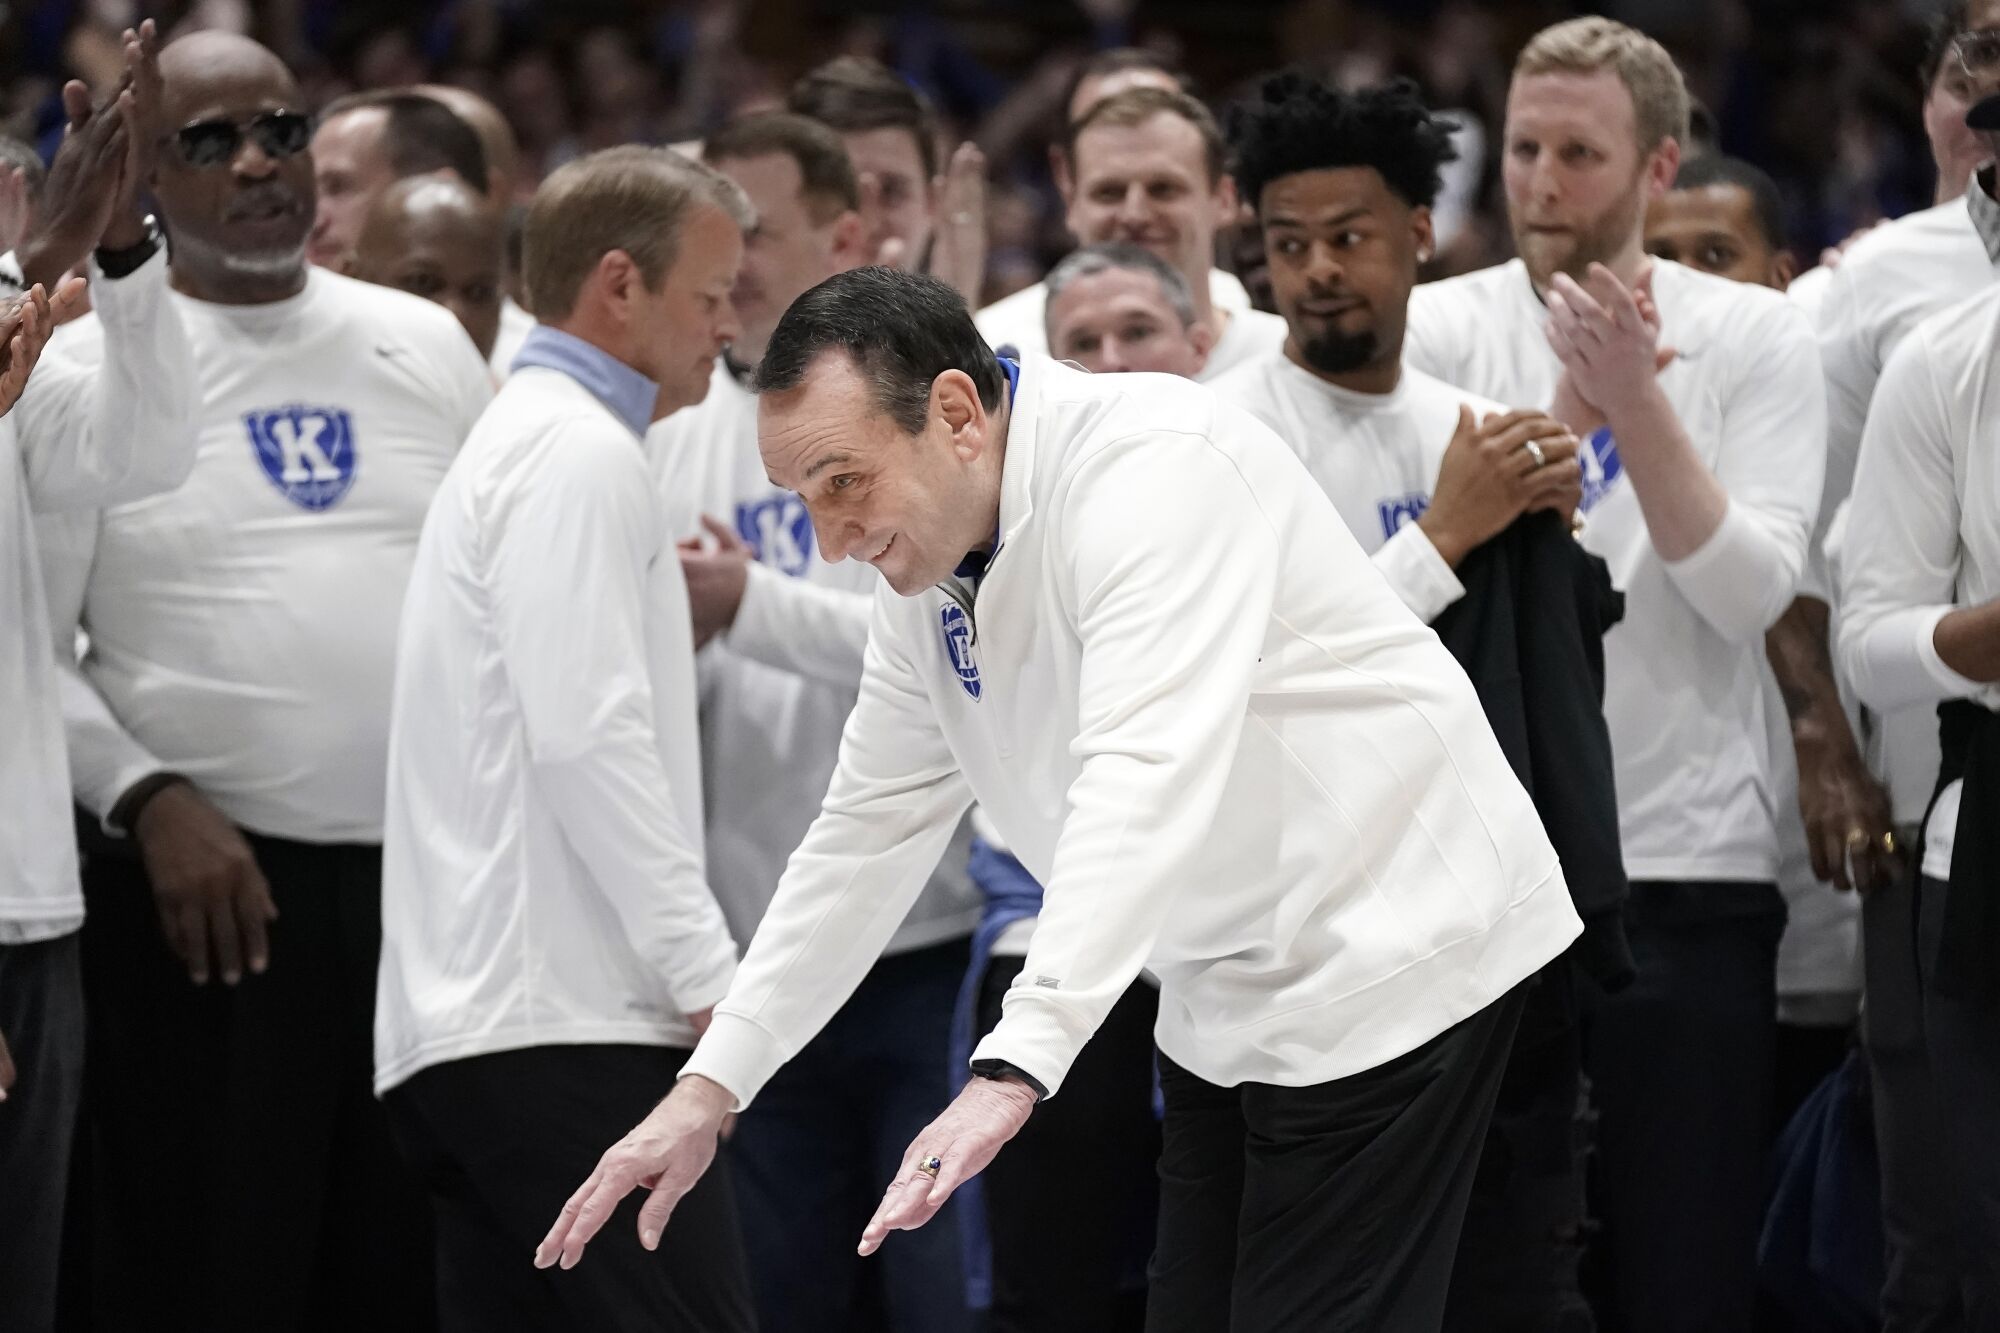 Duke coach Mike Krzyzewski takes a bow while being recognized during a pregame ceremony Saturday.